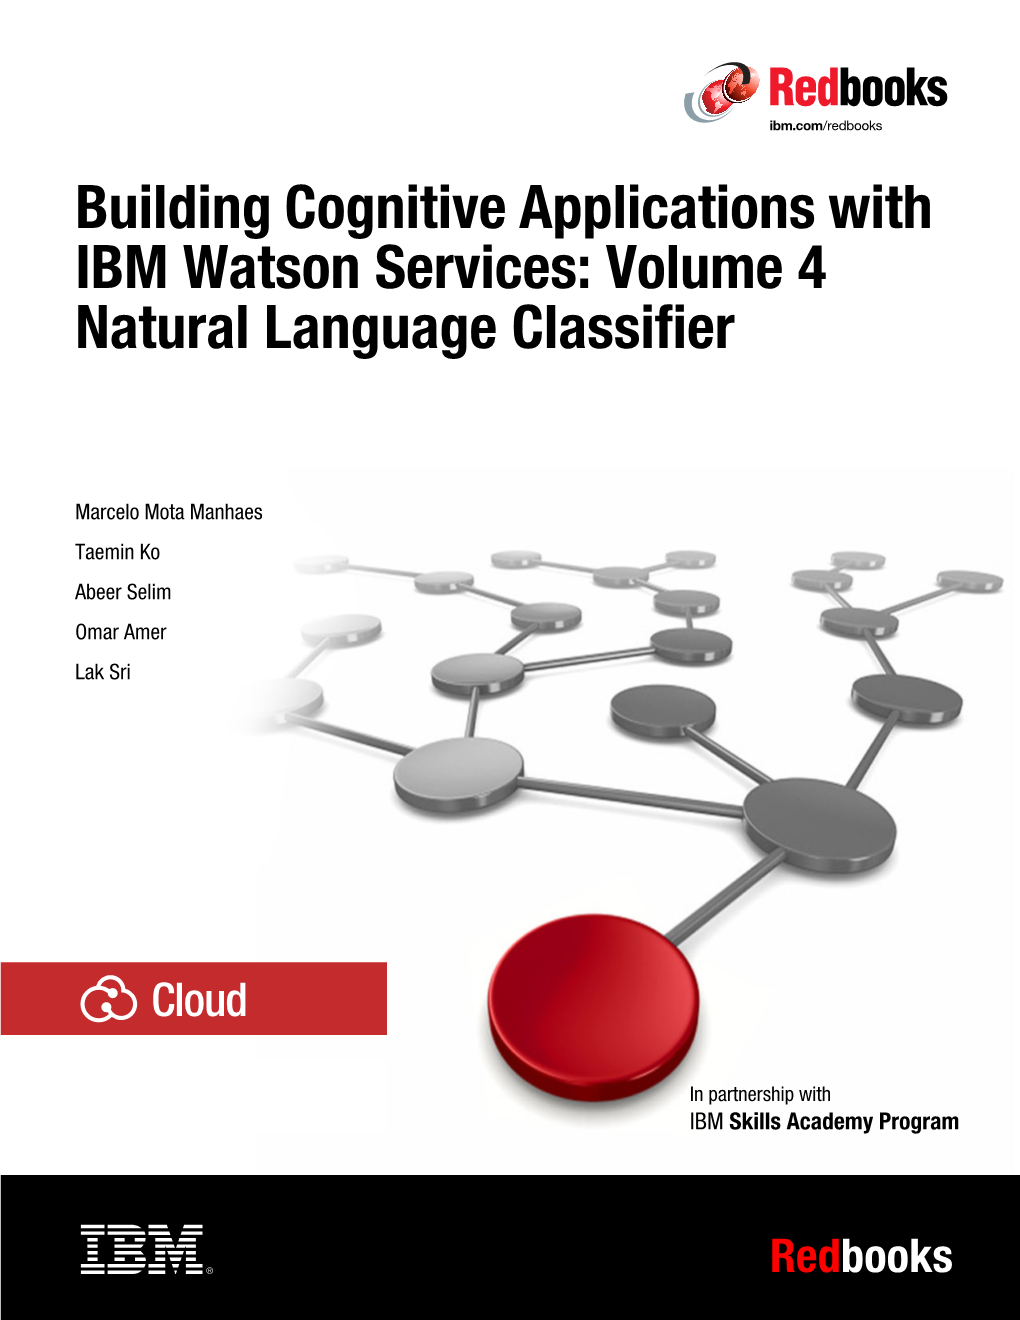 Building Cognitive Applications with IBM Watson Services: Volume 4 Natural Language Classifier